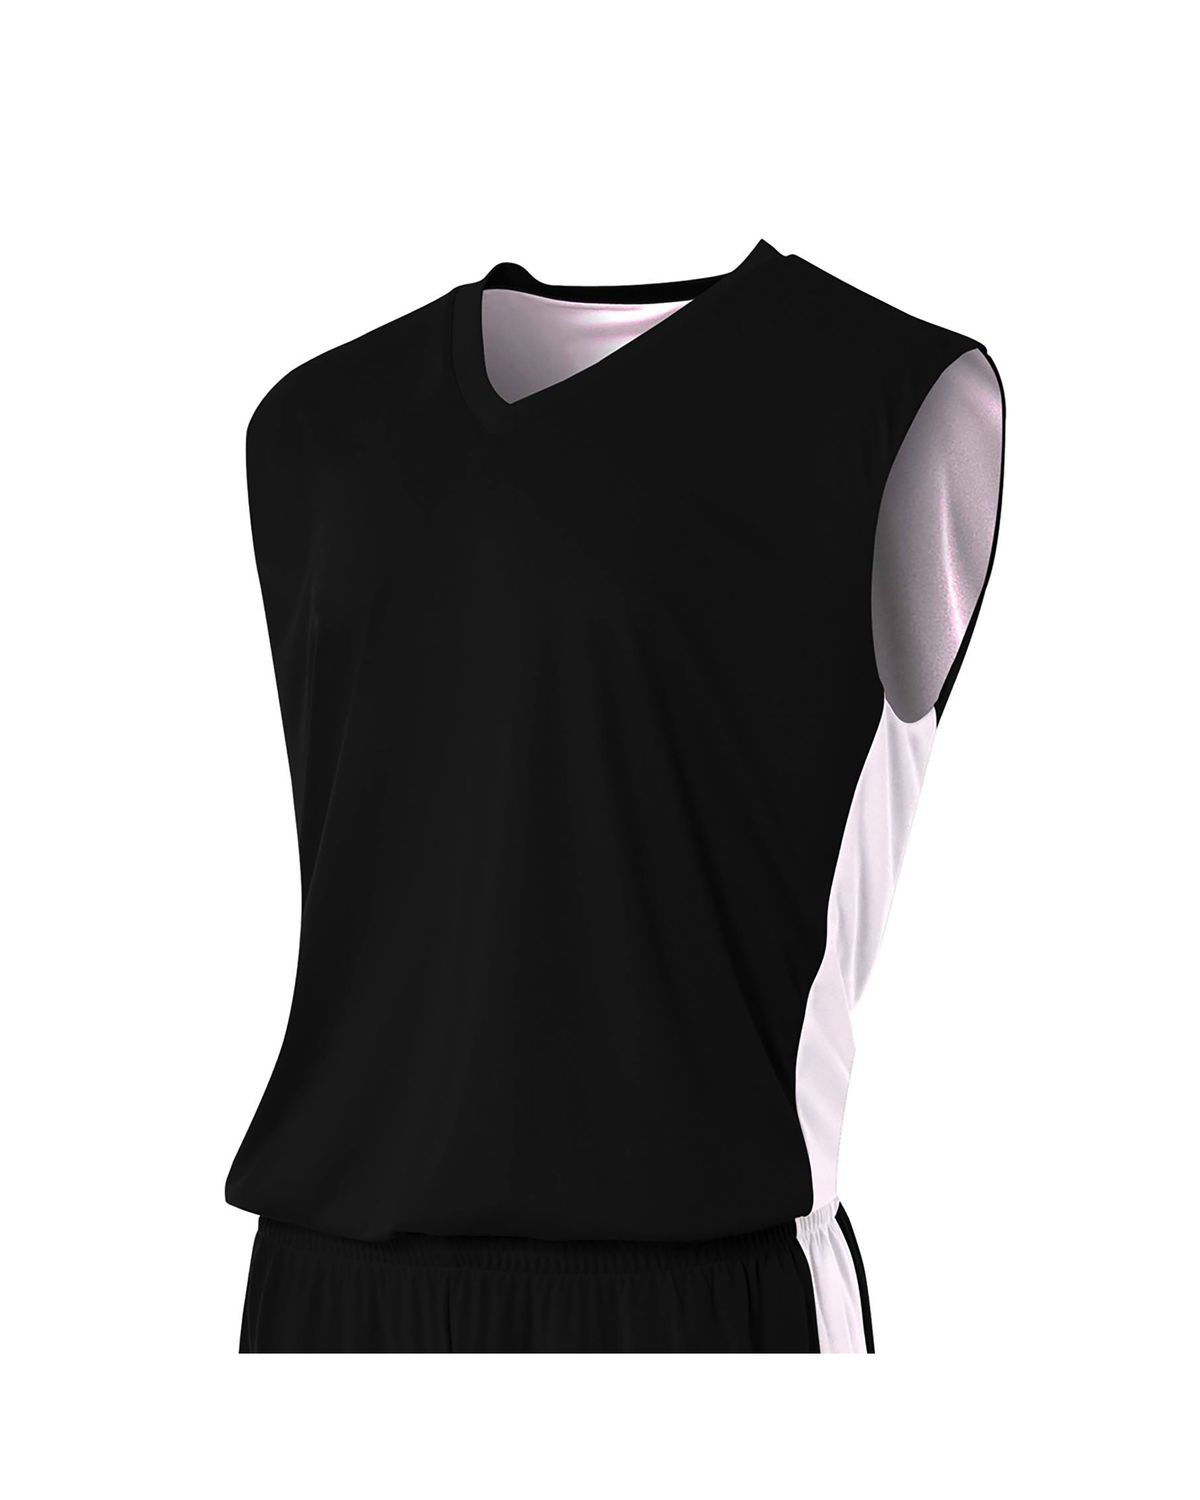 'A4 NB2320 Youth Reversible Moisture Management Muscle Shirt'